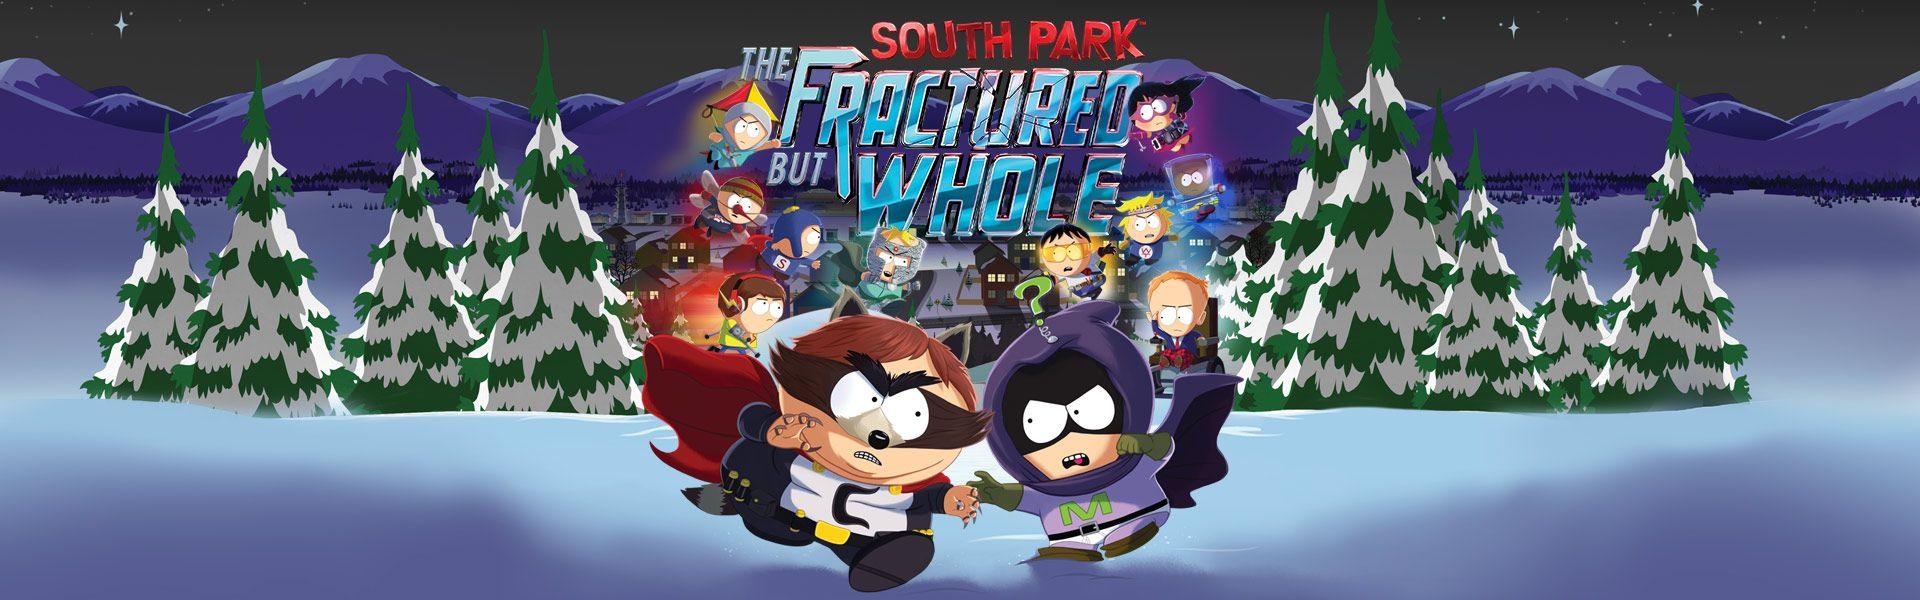 south park the fractured but whole gender neutral